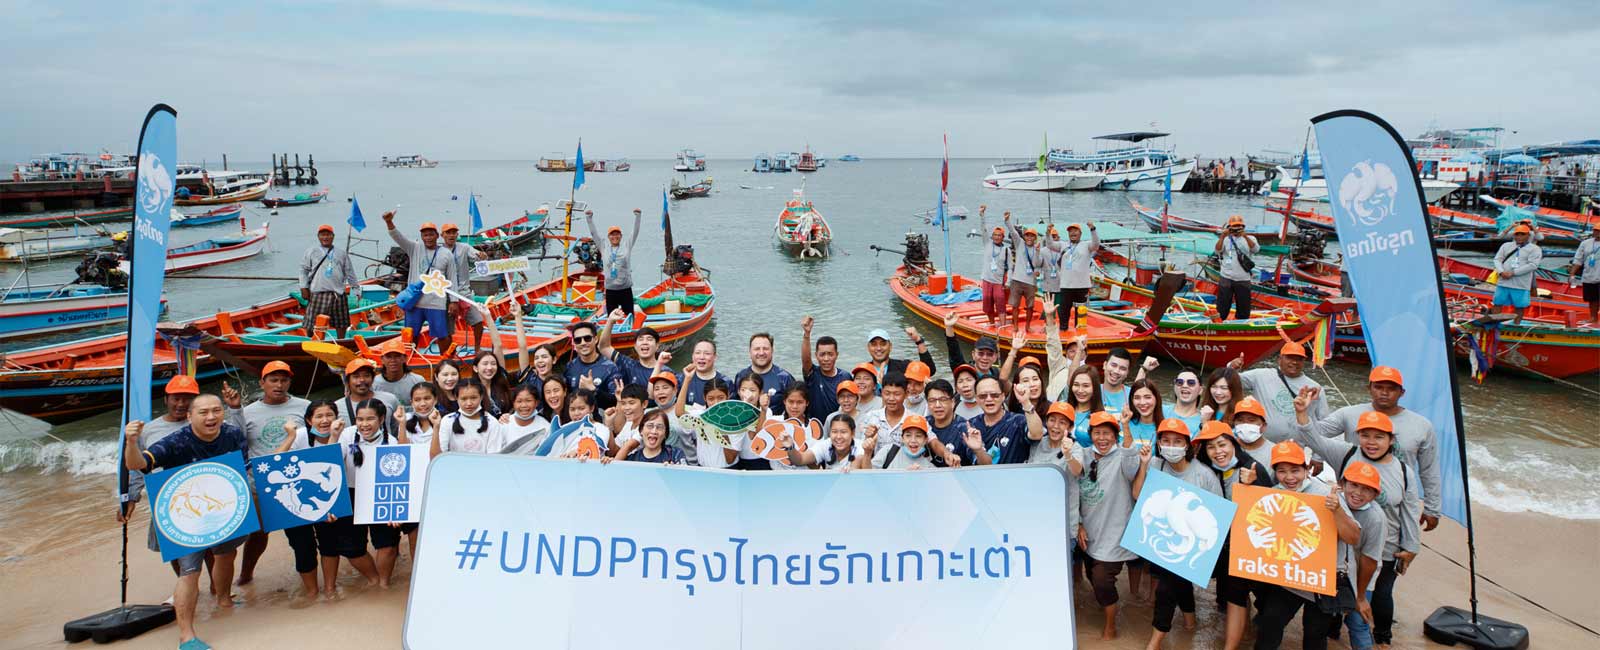 Koh Tao, Better Together Project in collaboration with UNDP